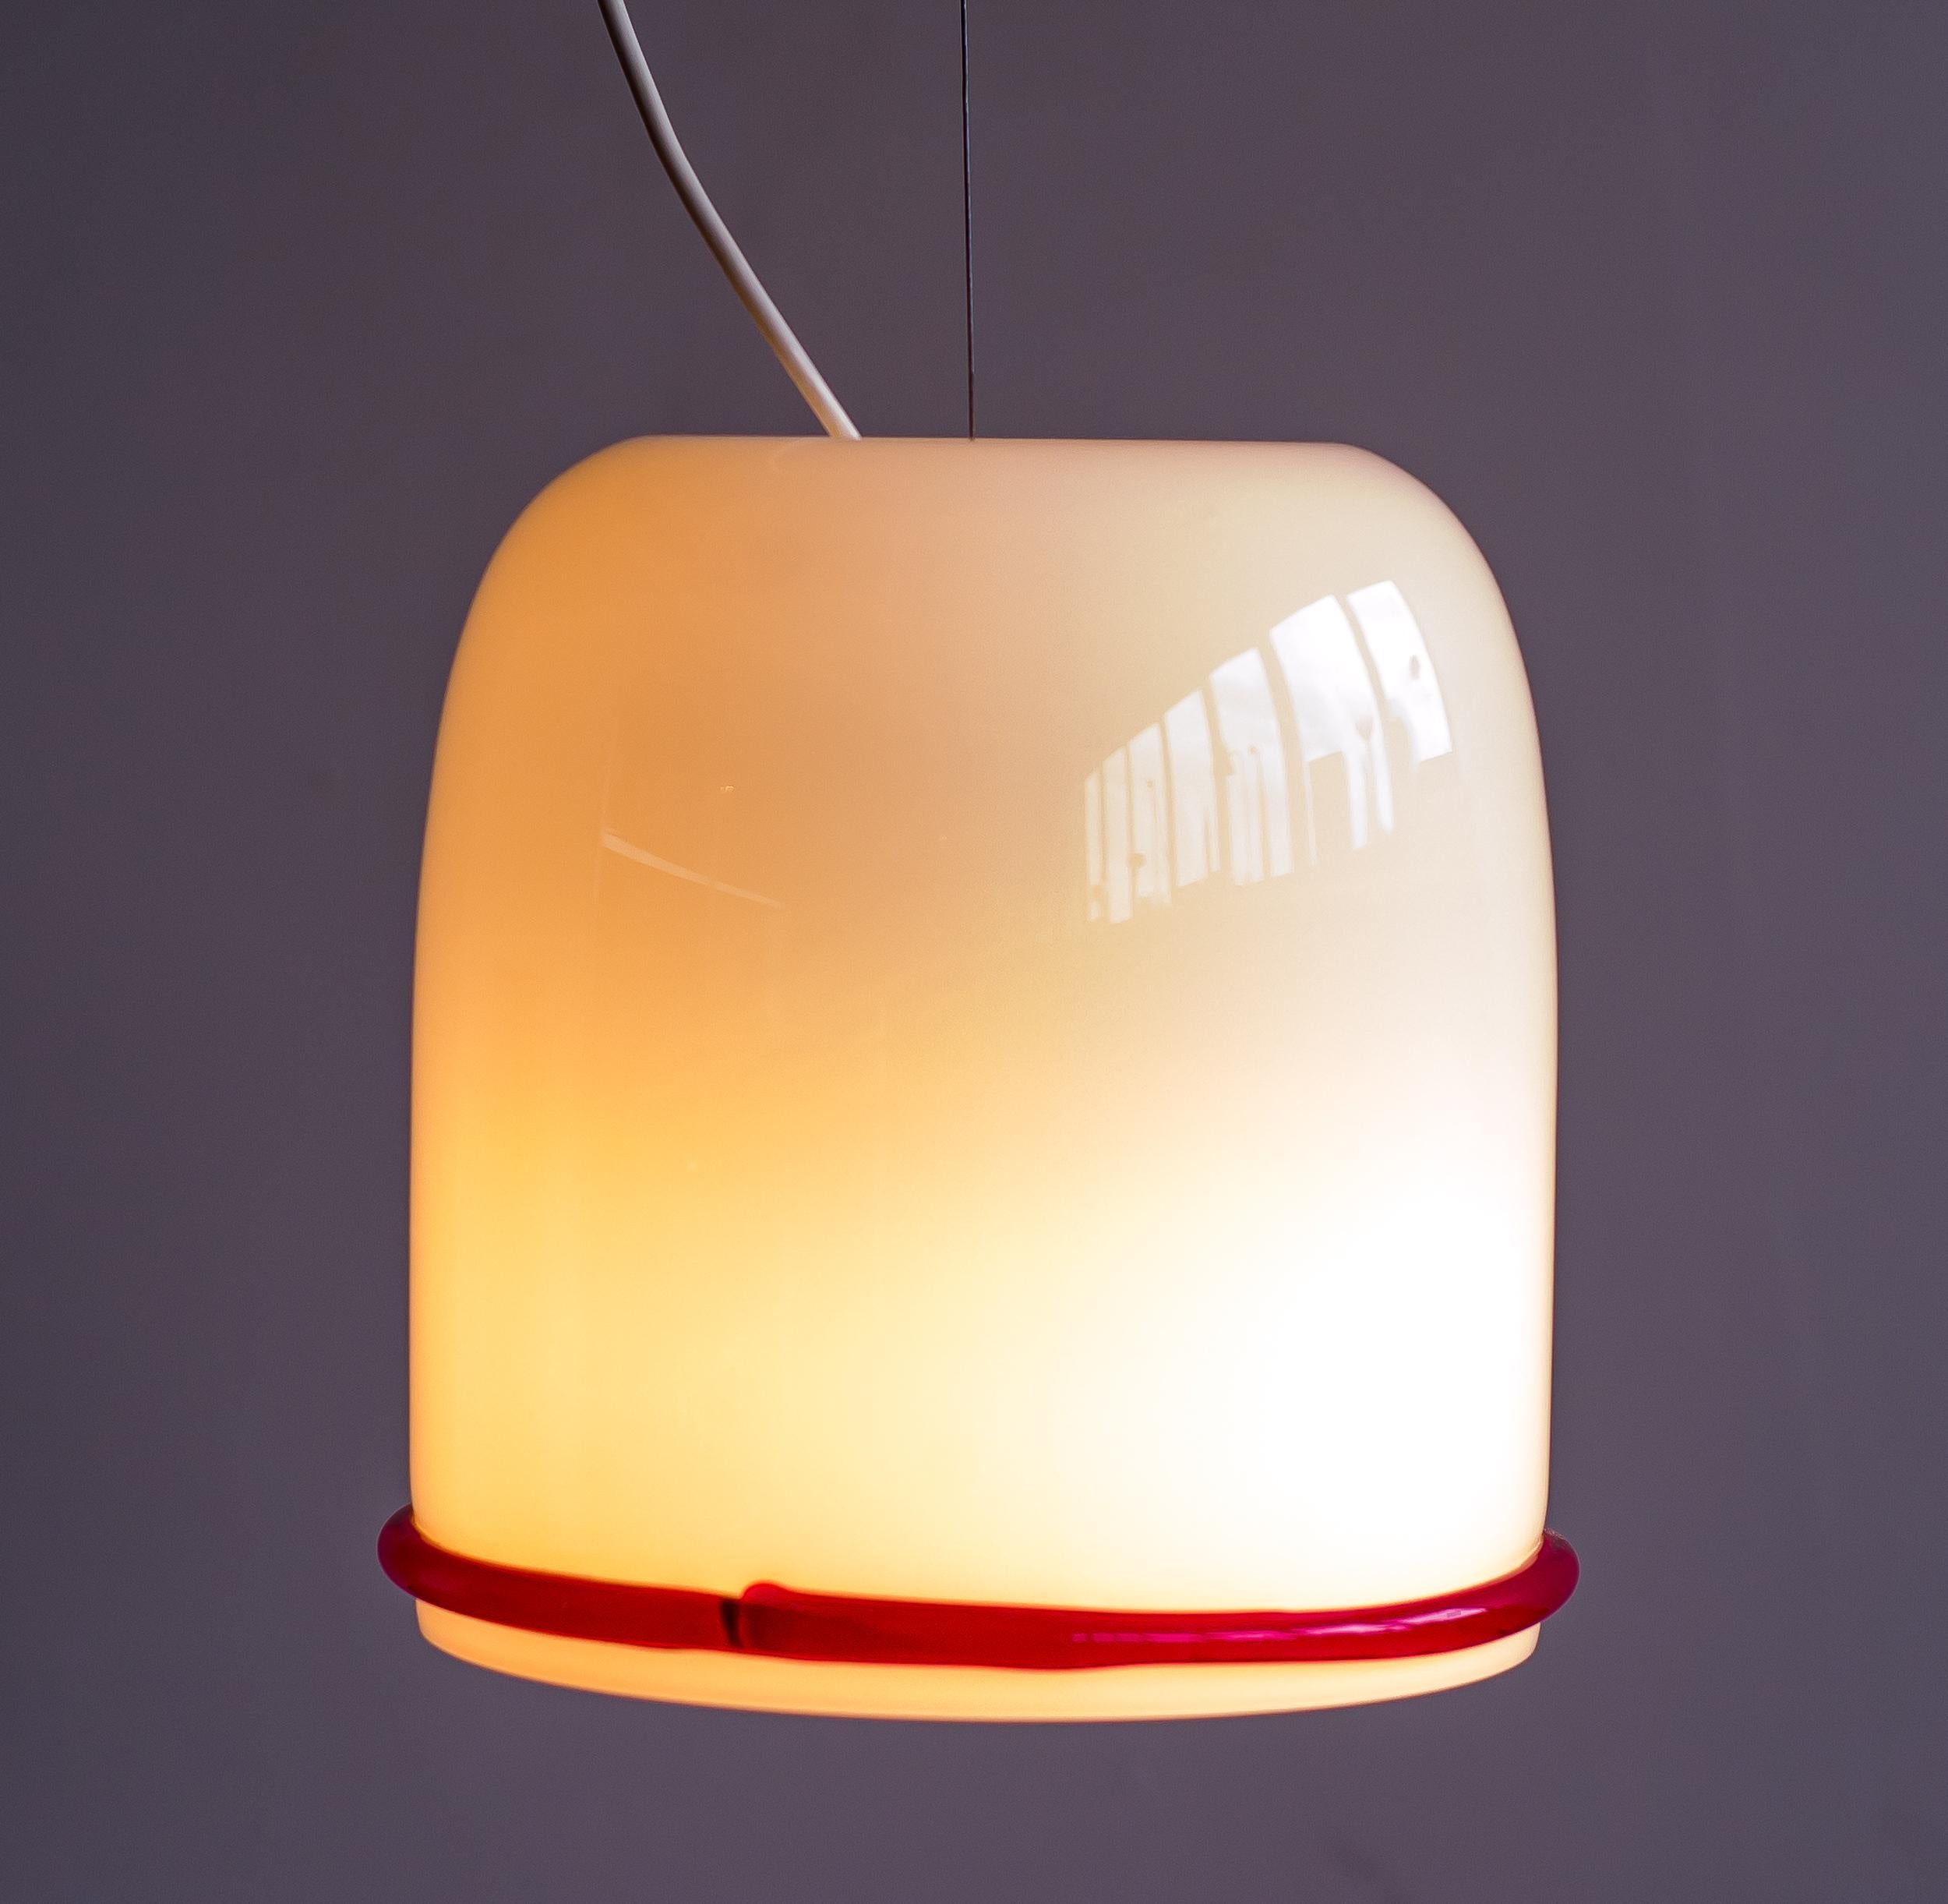 Clear glass over white glass pendant with clear red glass ribbon, designed by Ettore Sottsass for Vistosi. 
Height adjustable steel cable. The original white enameled steel canopy is included.
Signed Vistosi.

Ettore Sottsass was an Italian